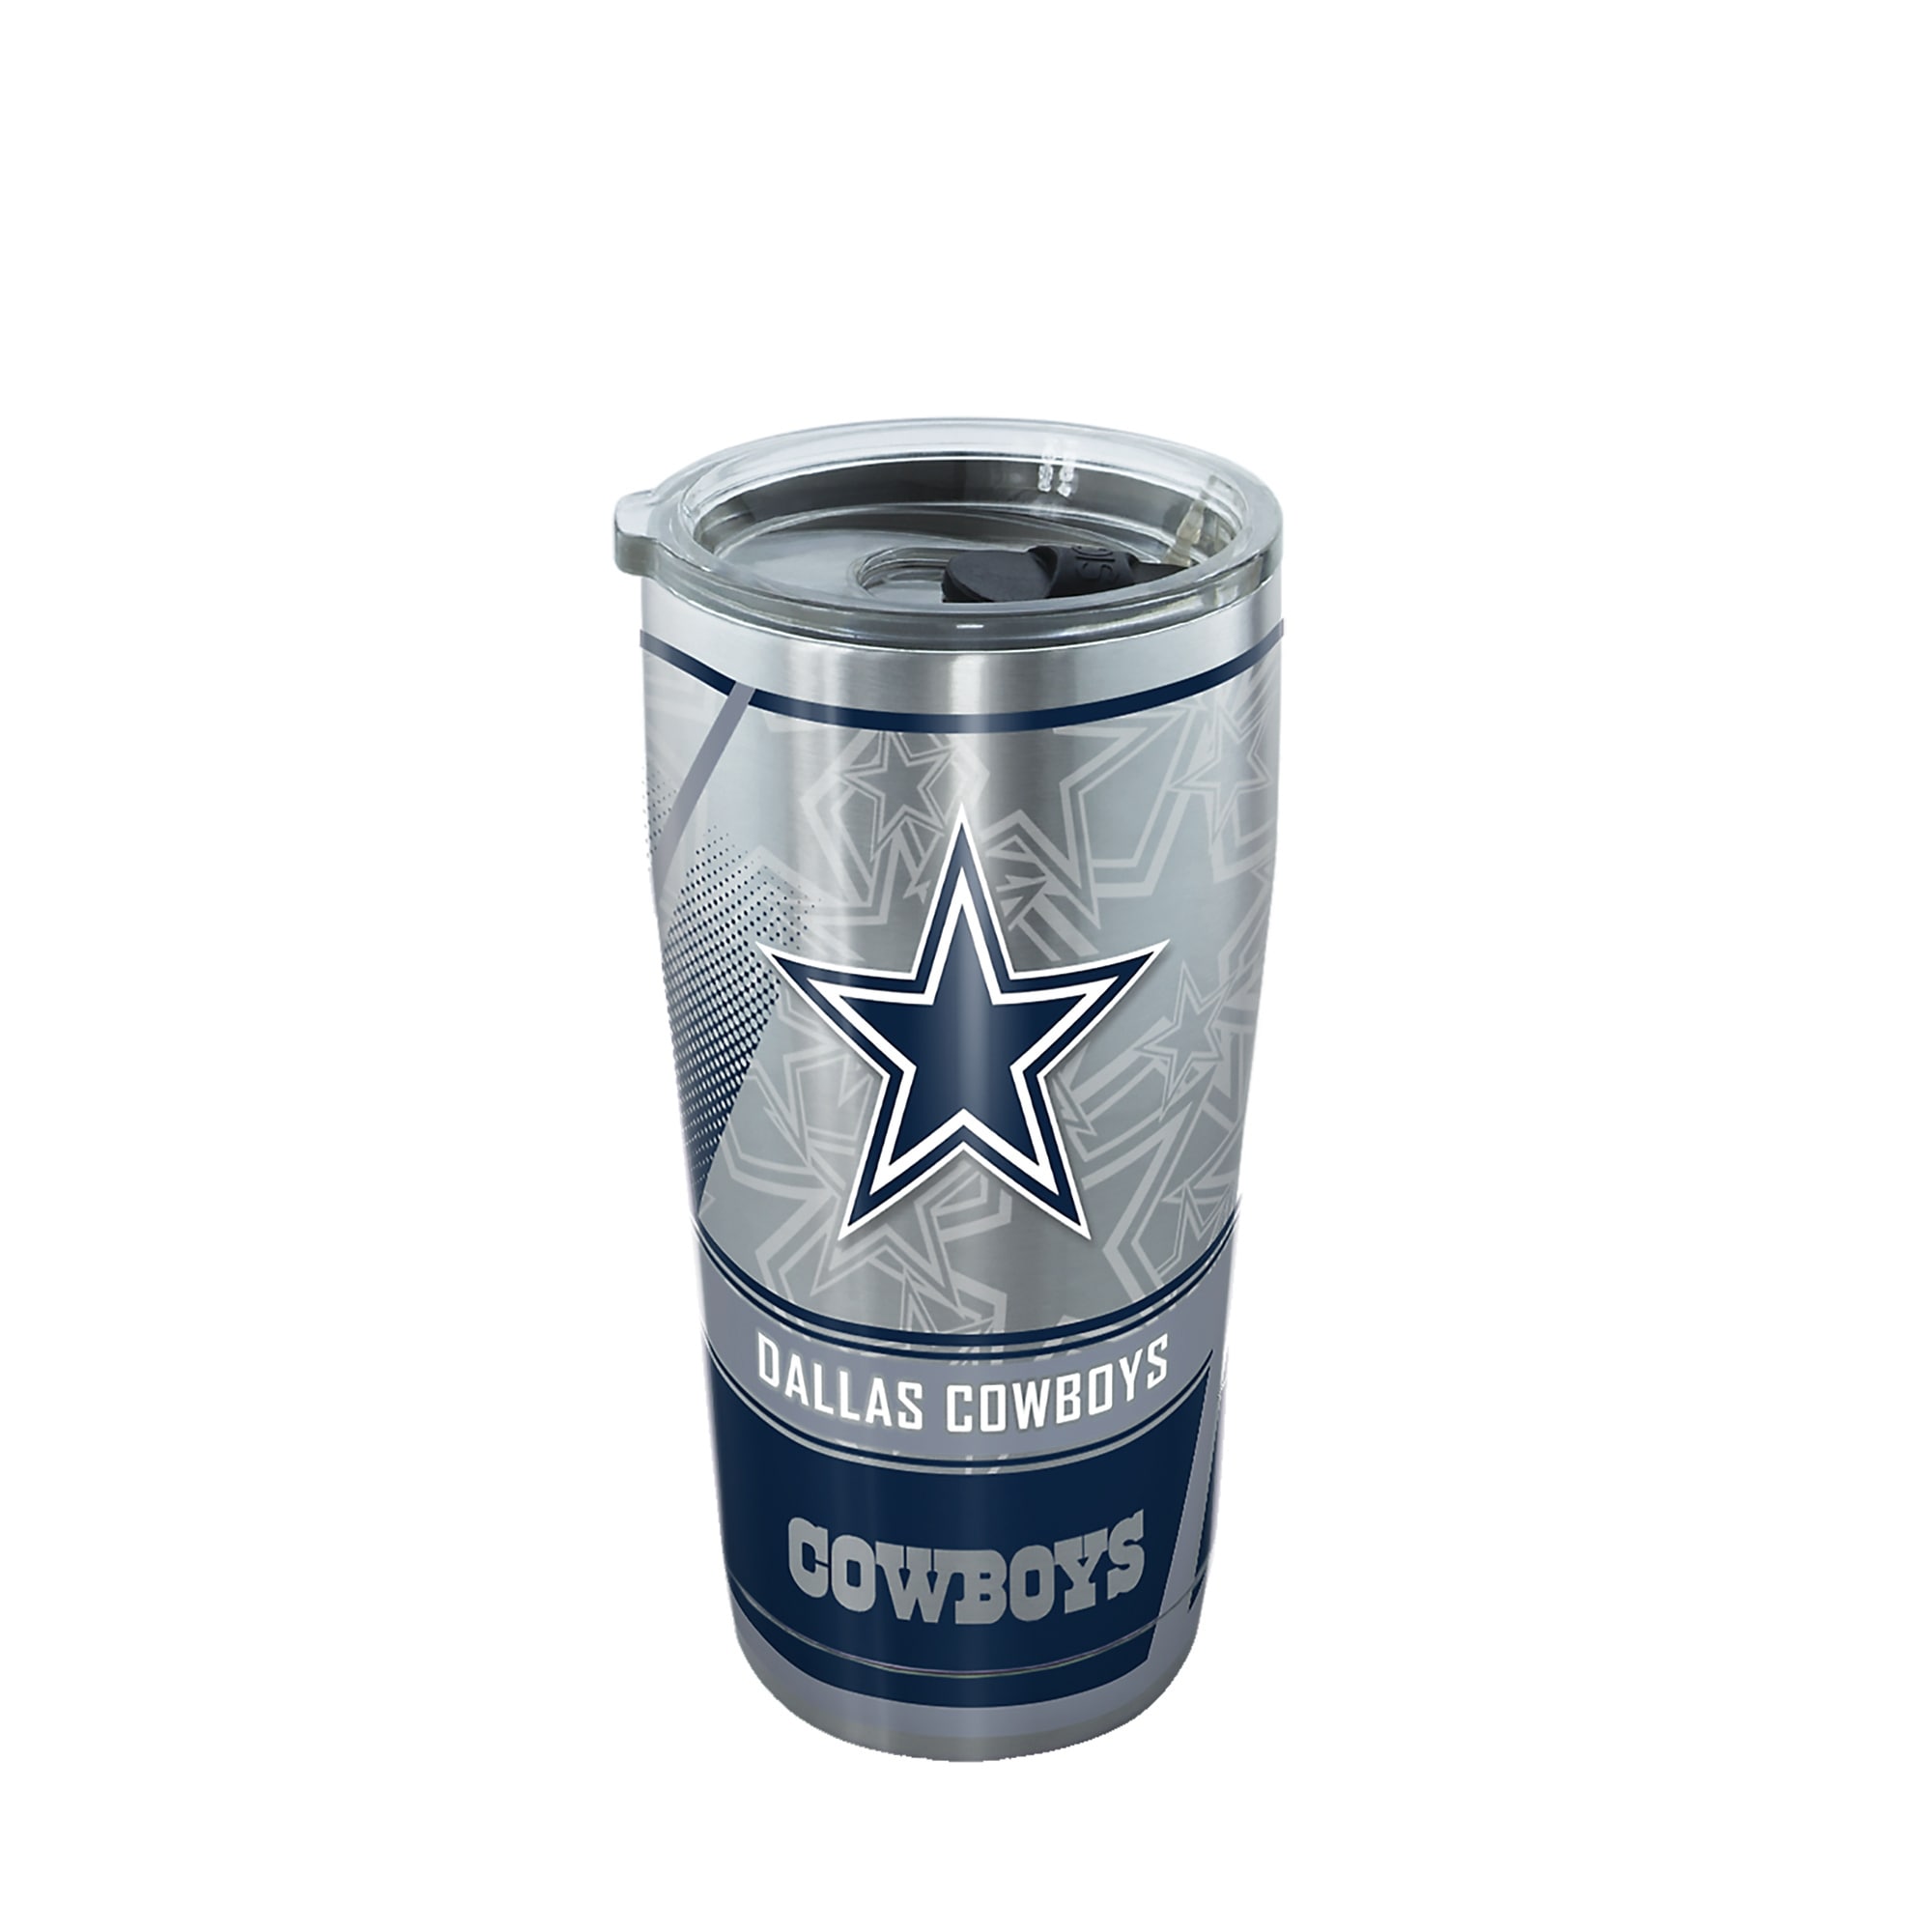 https://ak1.ostkcdn.com/images/products/is/images/direct/92724517f1733add8ff06819fbd9c901aac67c04/NFL-Dallas-Cowboys-Edge-20-oz-Stainless-Steel-Tumbler-with-lid.jpg